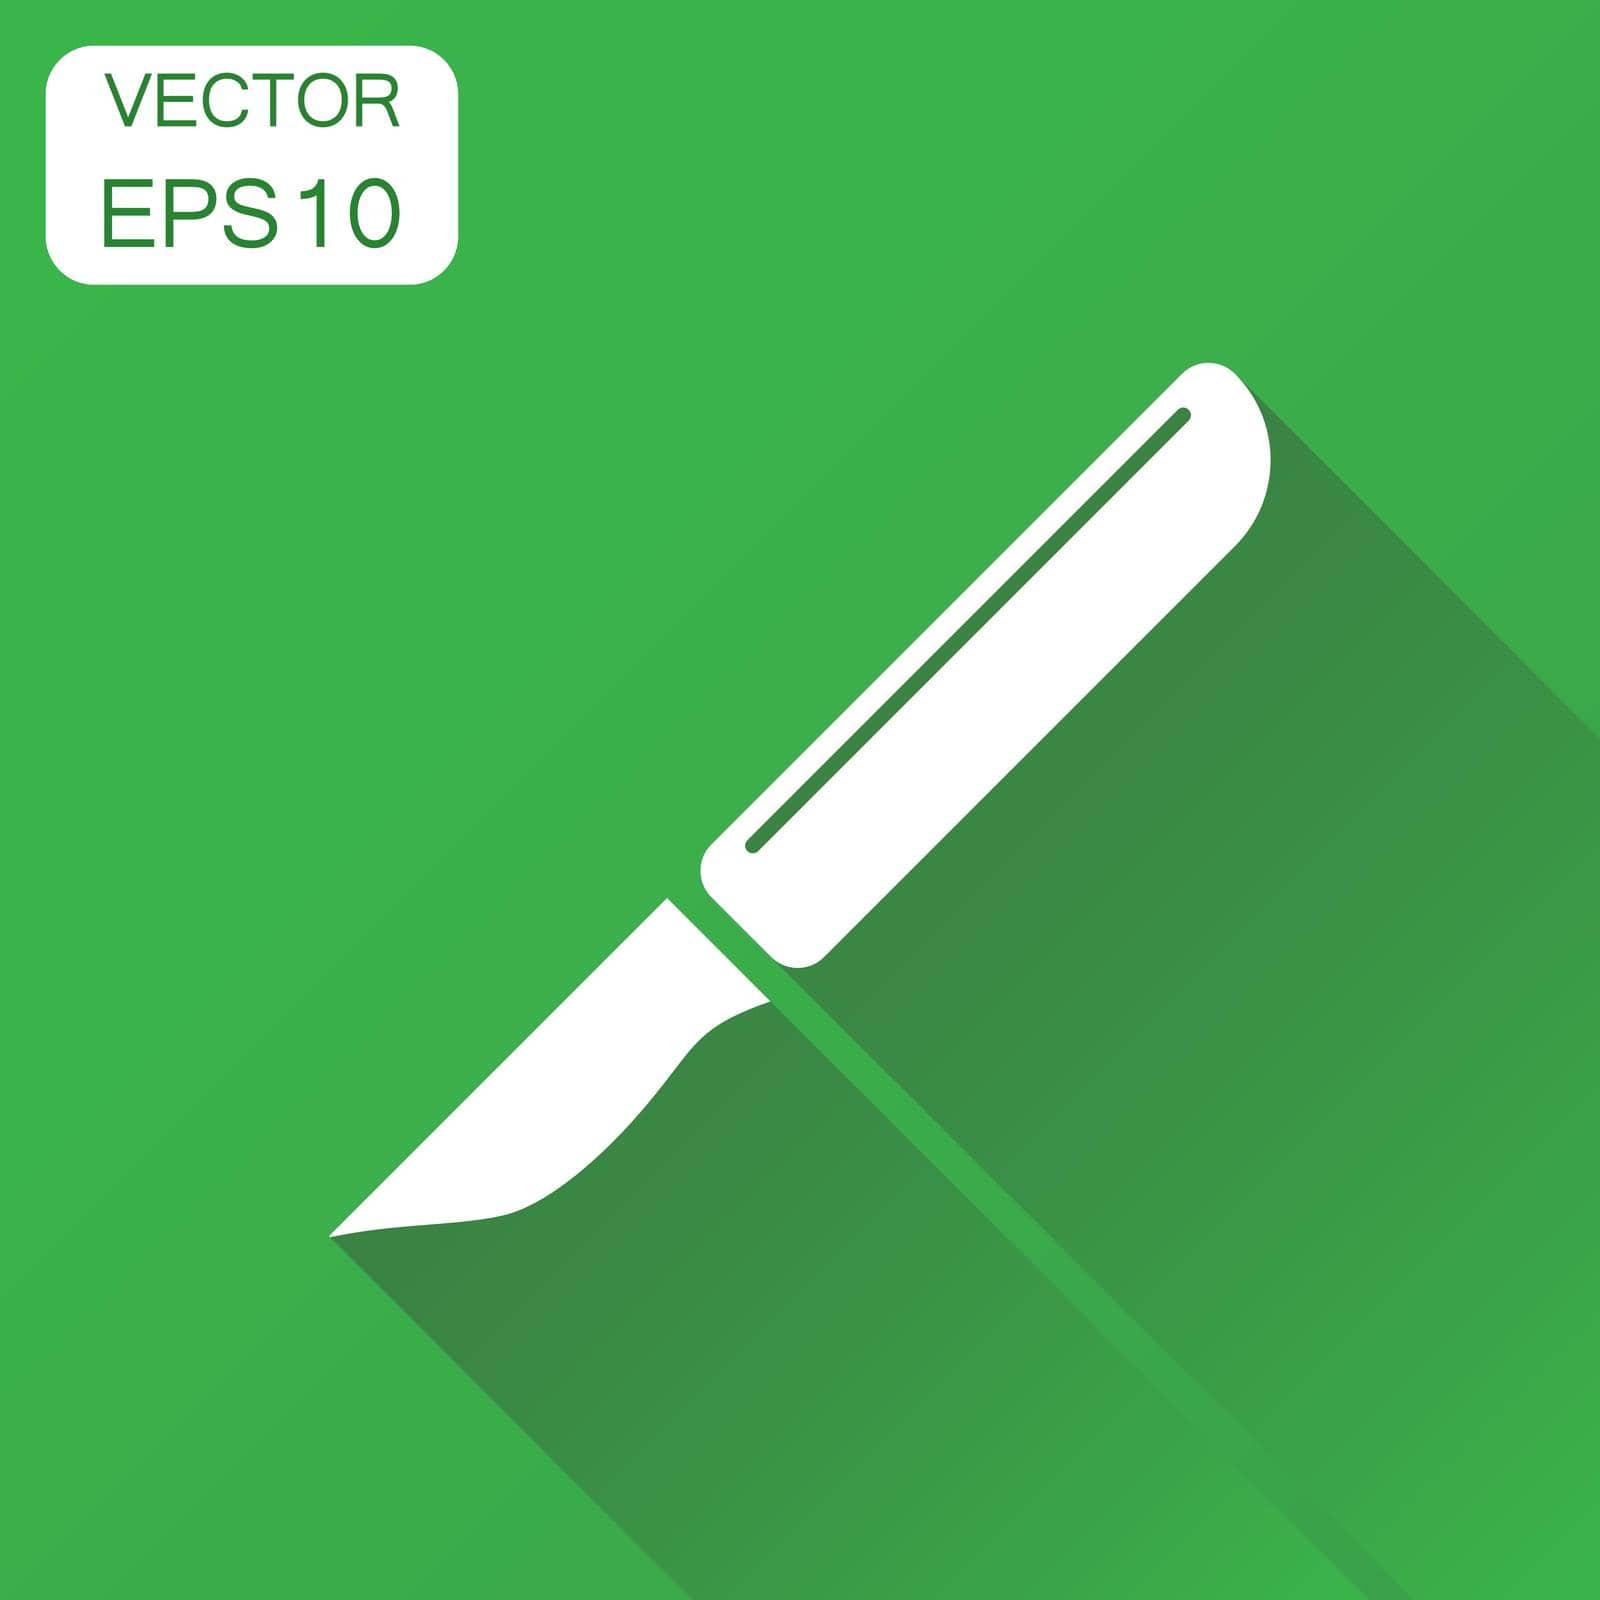 Medical scalpel icon. Business concept hospital surgery knife pictogram. Vector illustration on green background with long shadow. by LysenkoA